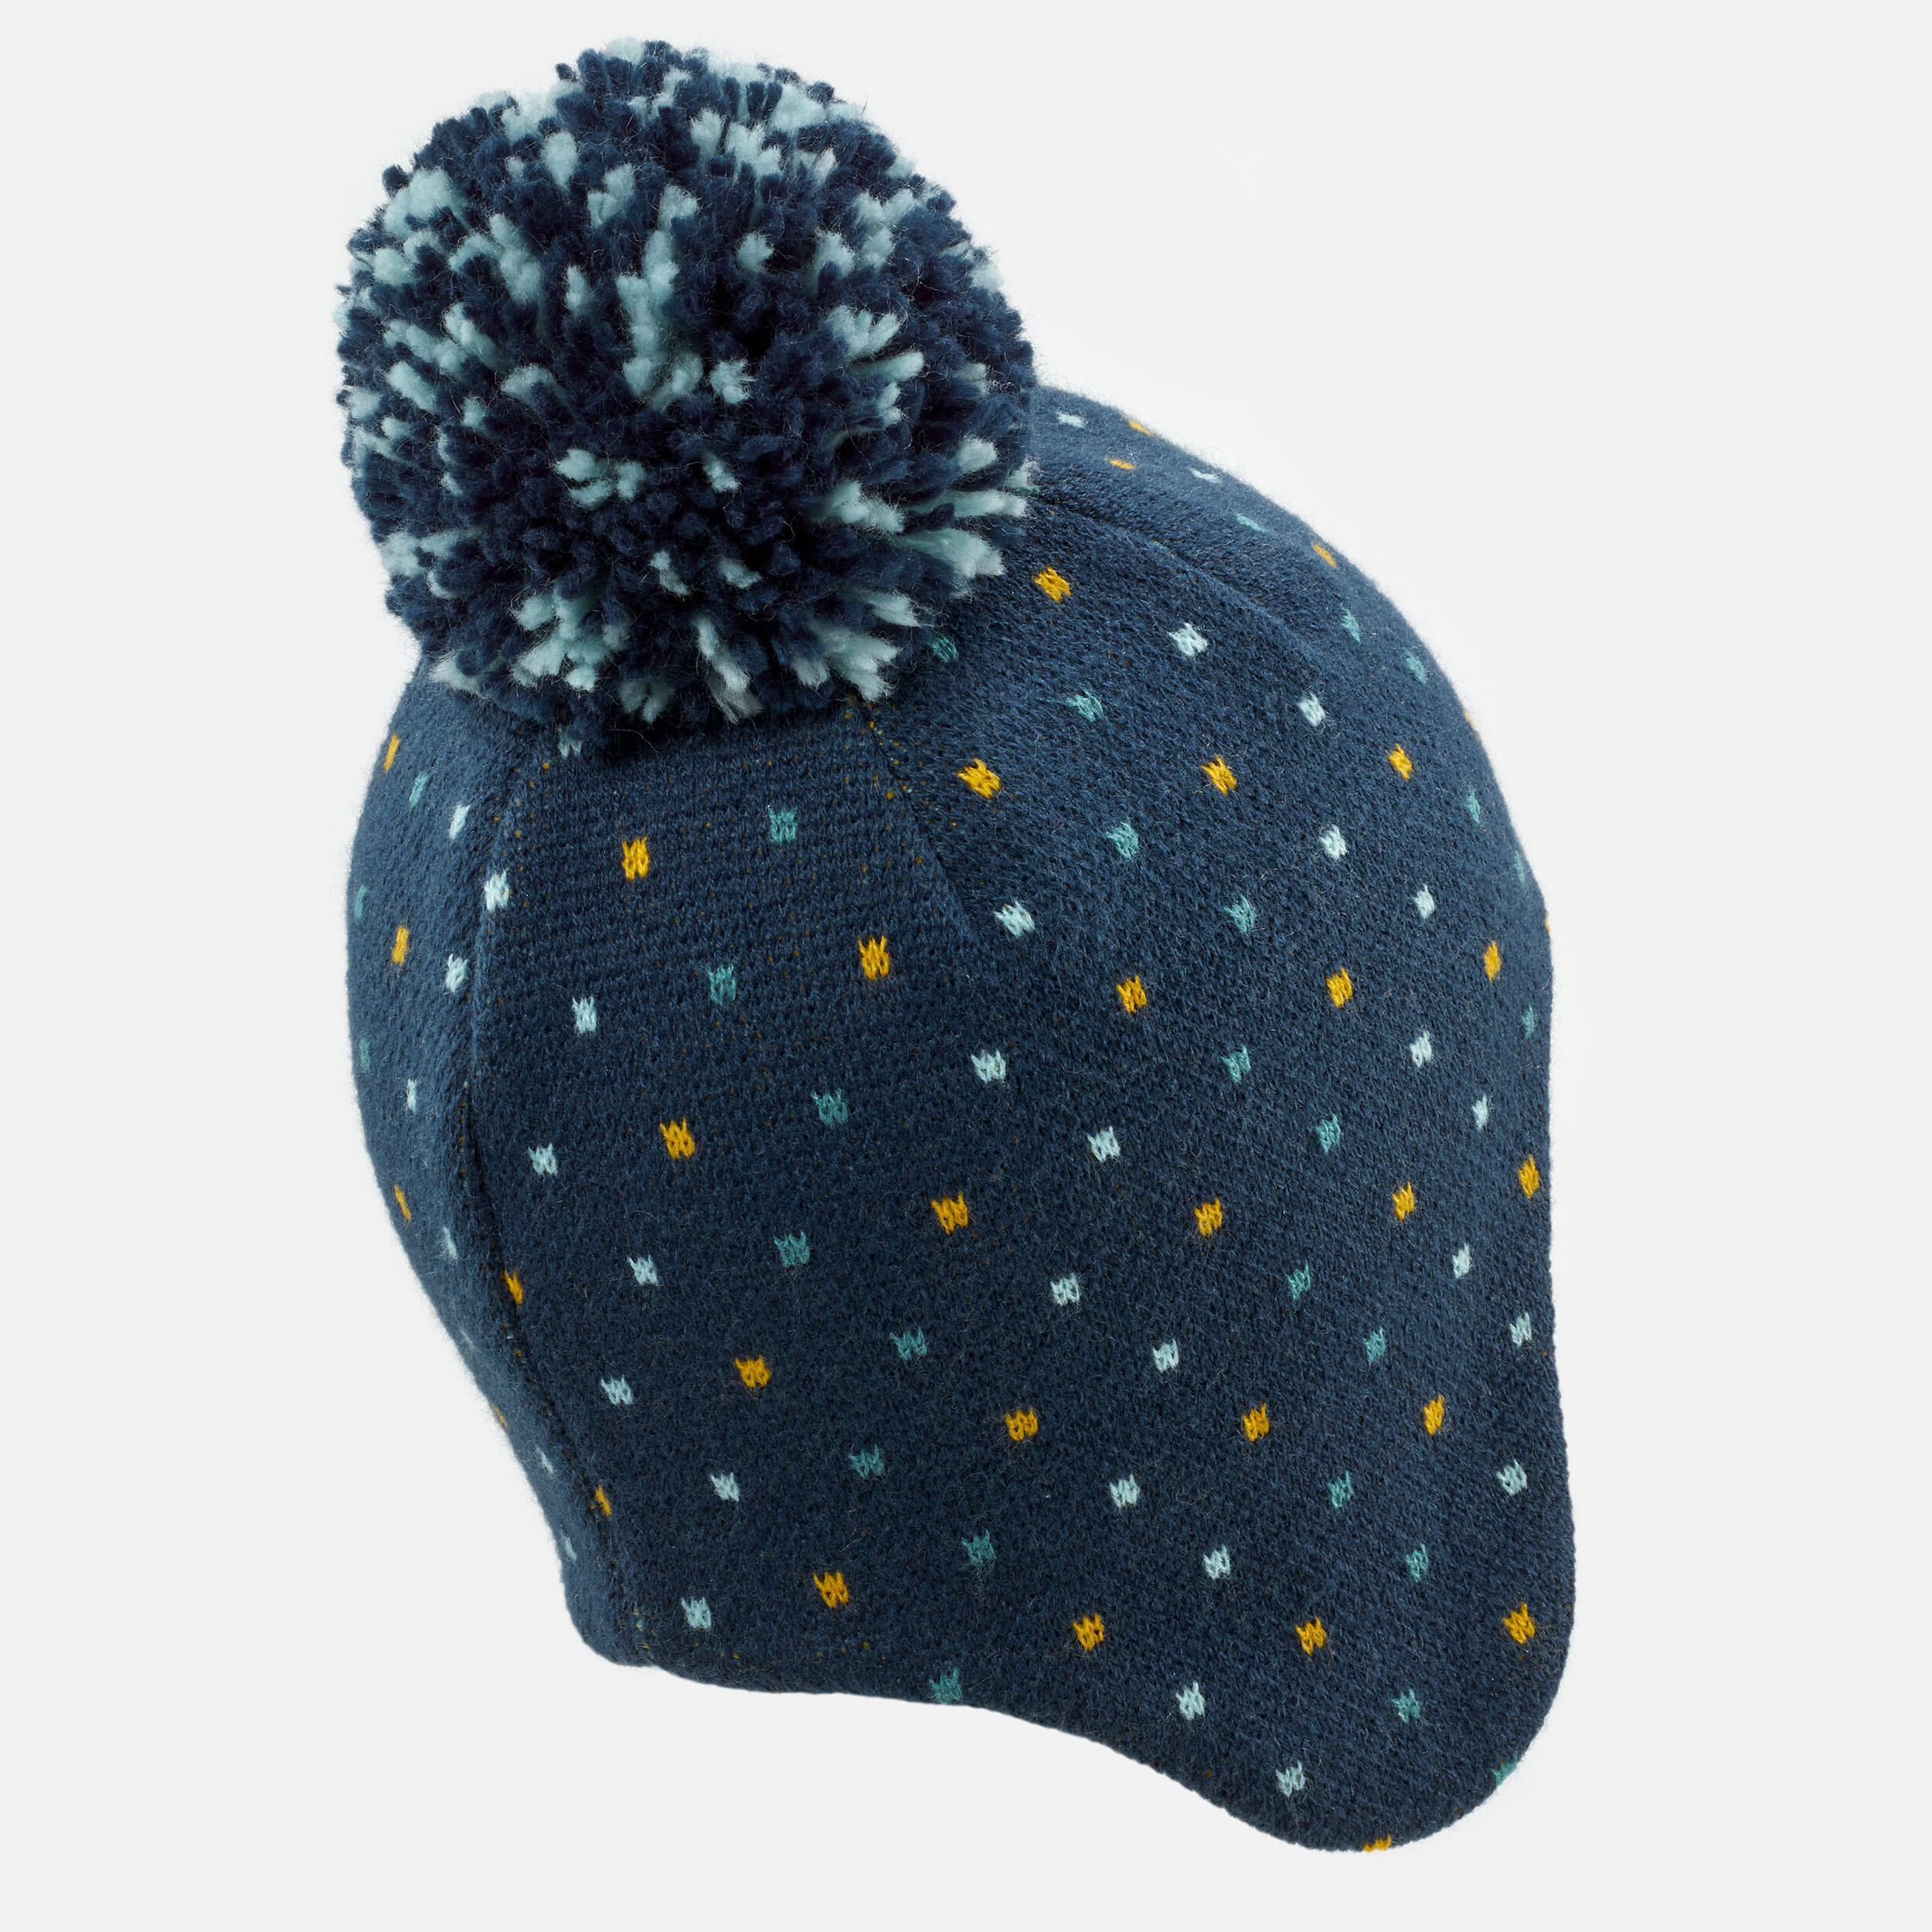 Baby Peruvian ski/sledge hat - SIMPLE WARM navy blue and turquoise 6/8